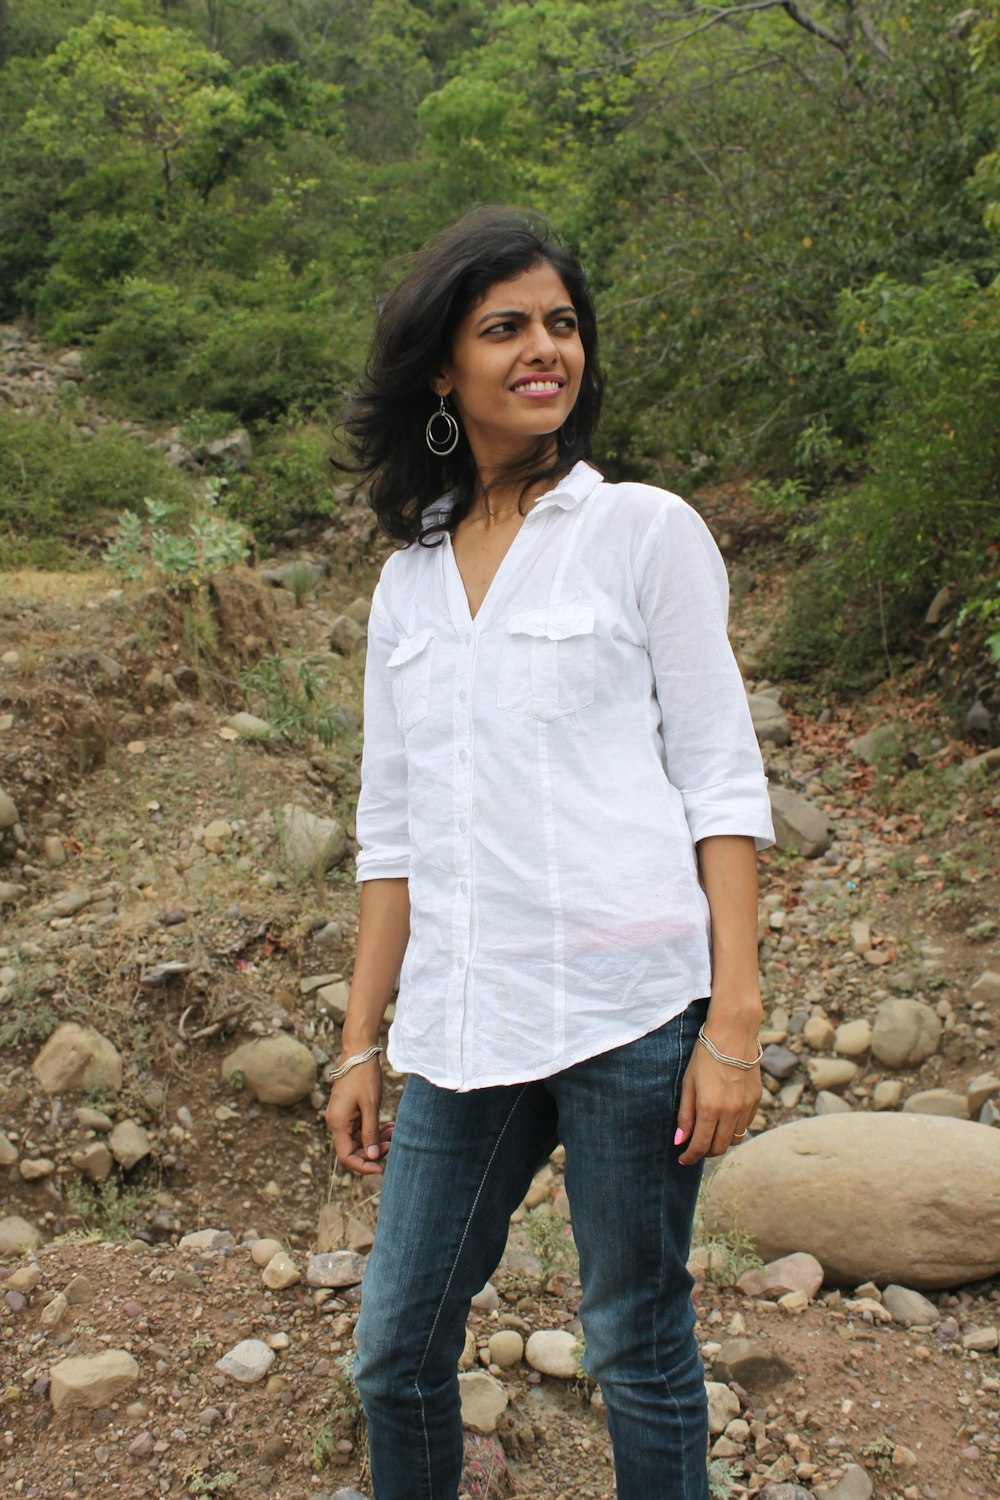 woman in white button up shirt and blue denim jeans standing on rocky ground during daytime